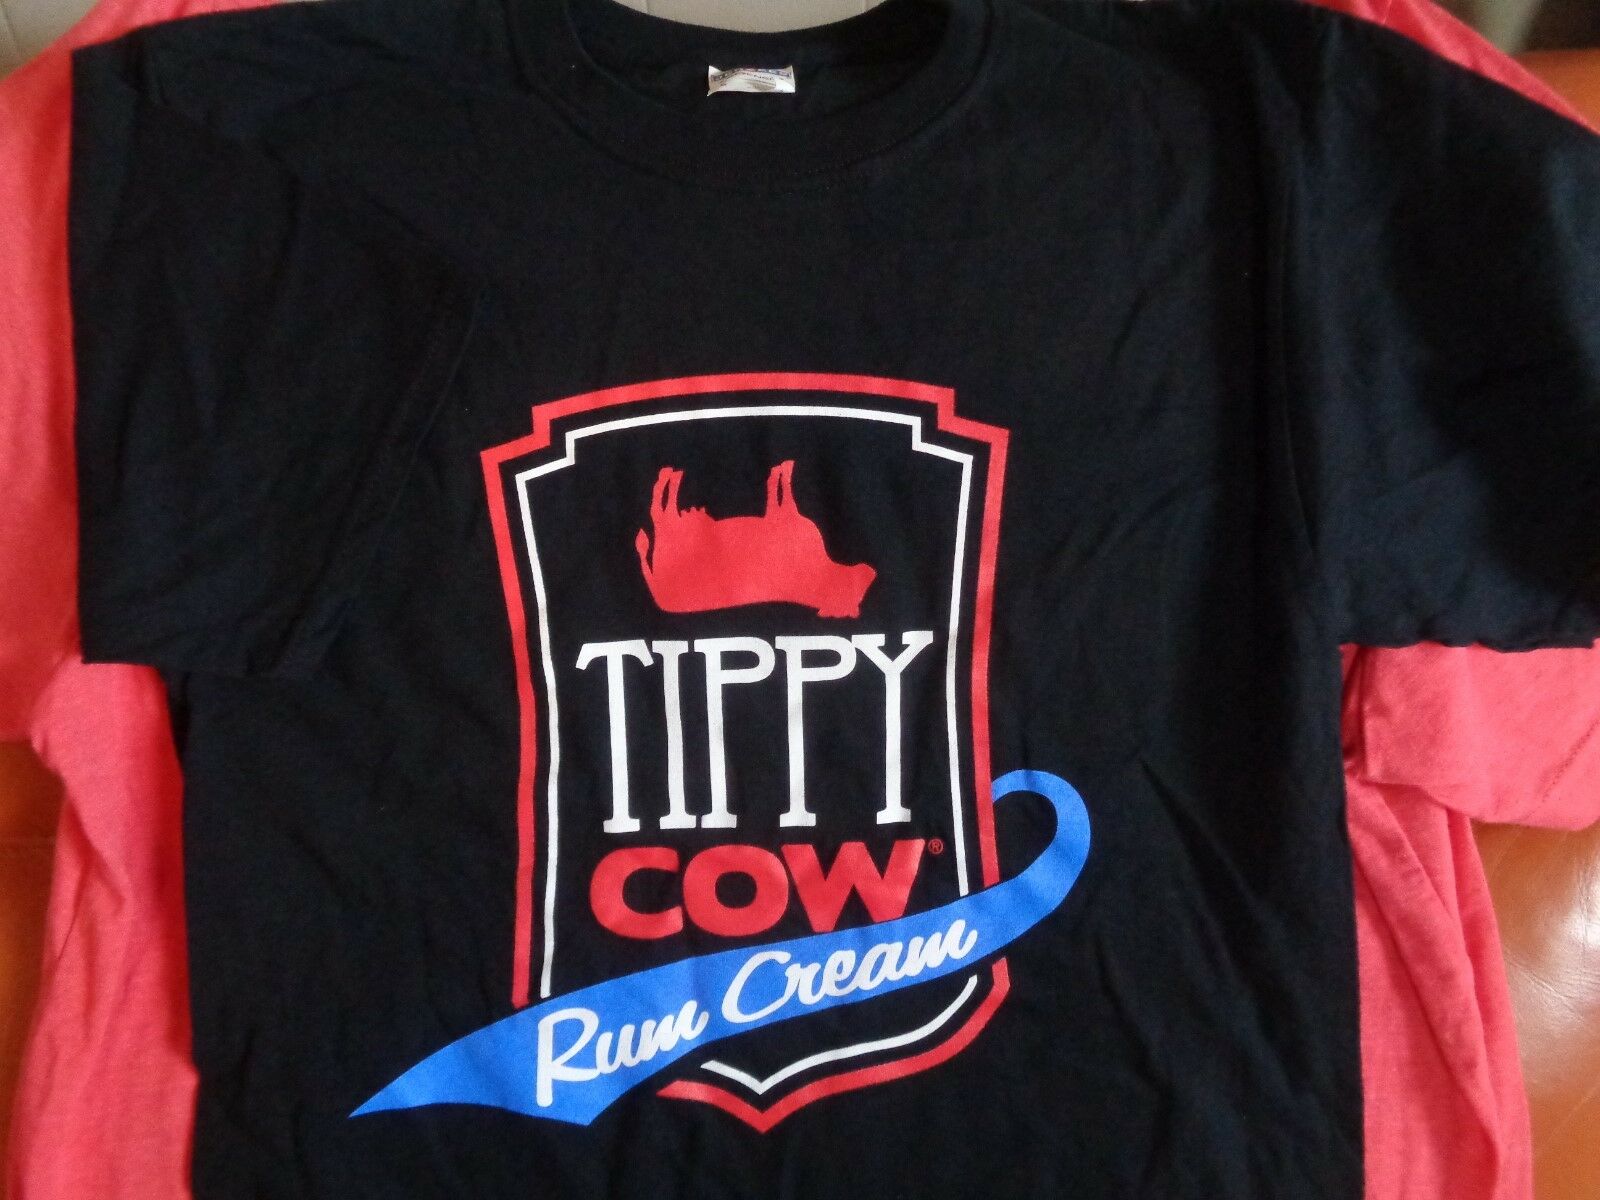 Tippy Cow Rum Cream Wisconsin Cows! "tip Our Staff" T Shirt - New! Cool! Small